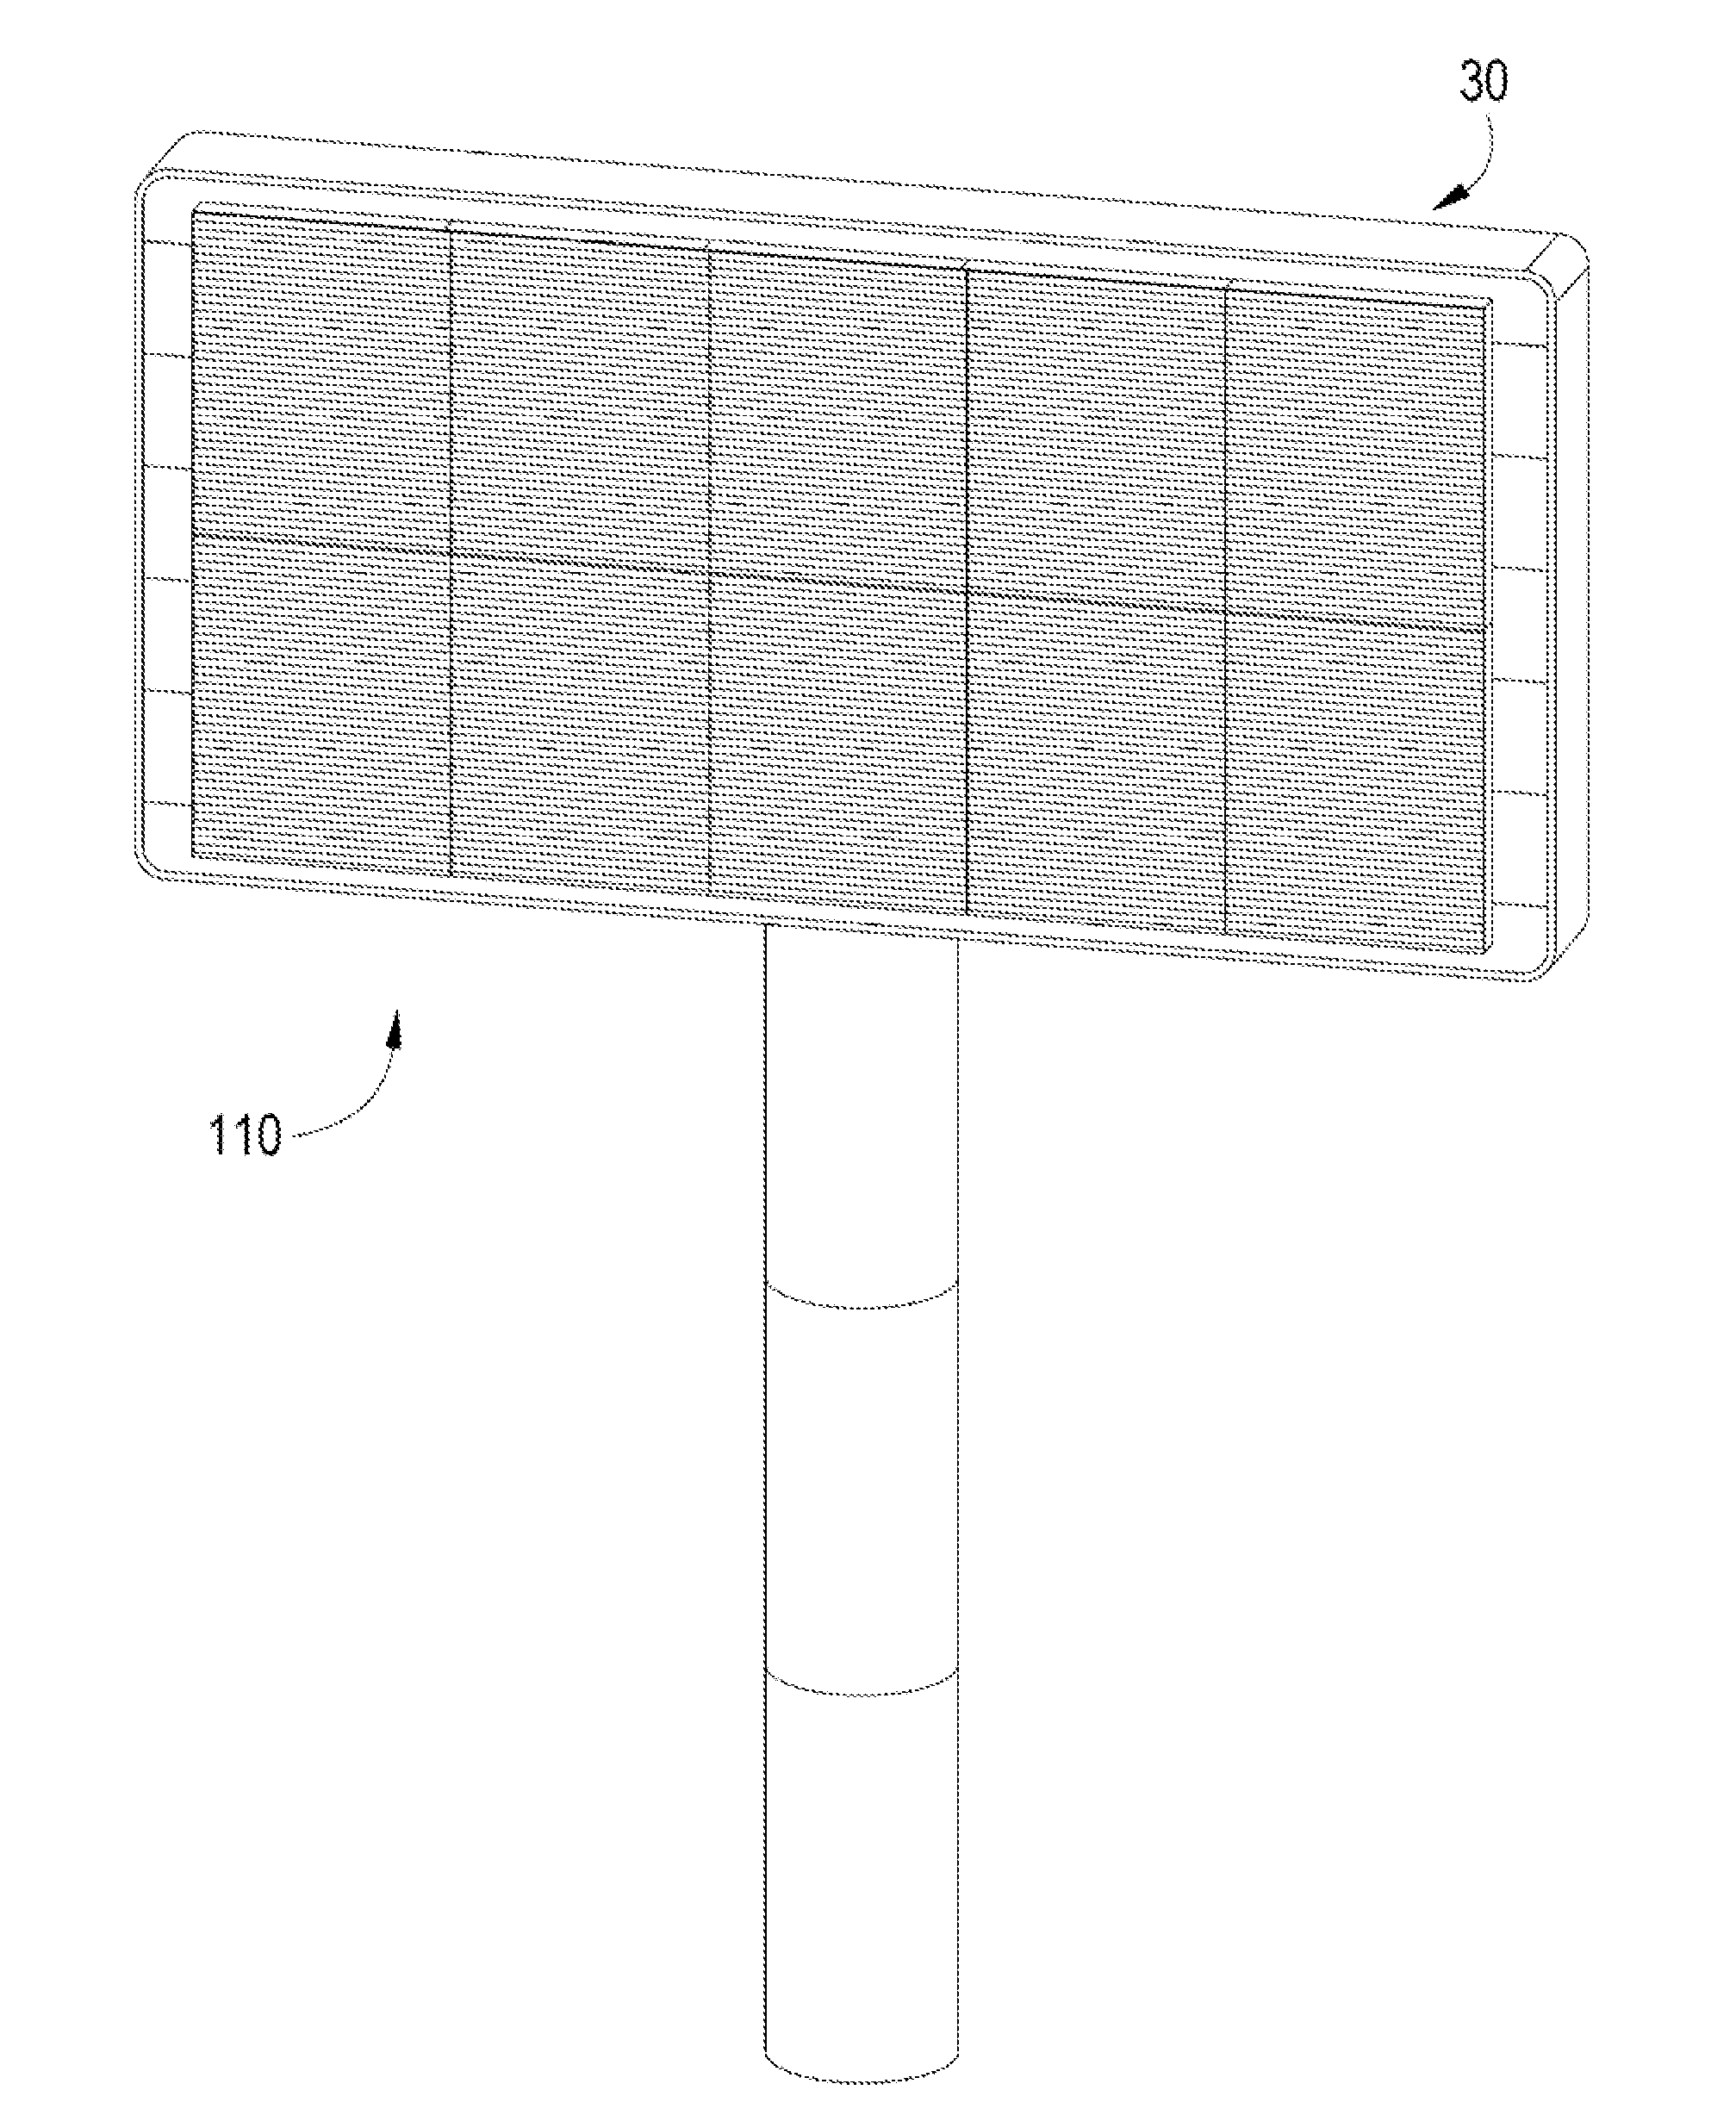 Field retrofit kit for converting a static billboard into a dynamic electronic billboard, and methods of retrofitting and using same